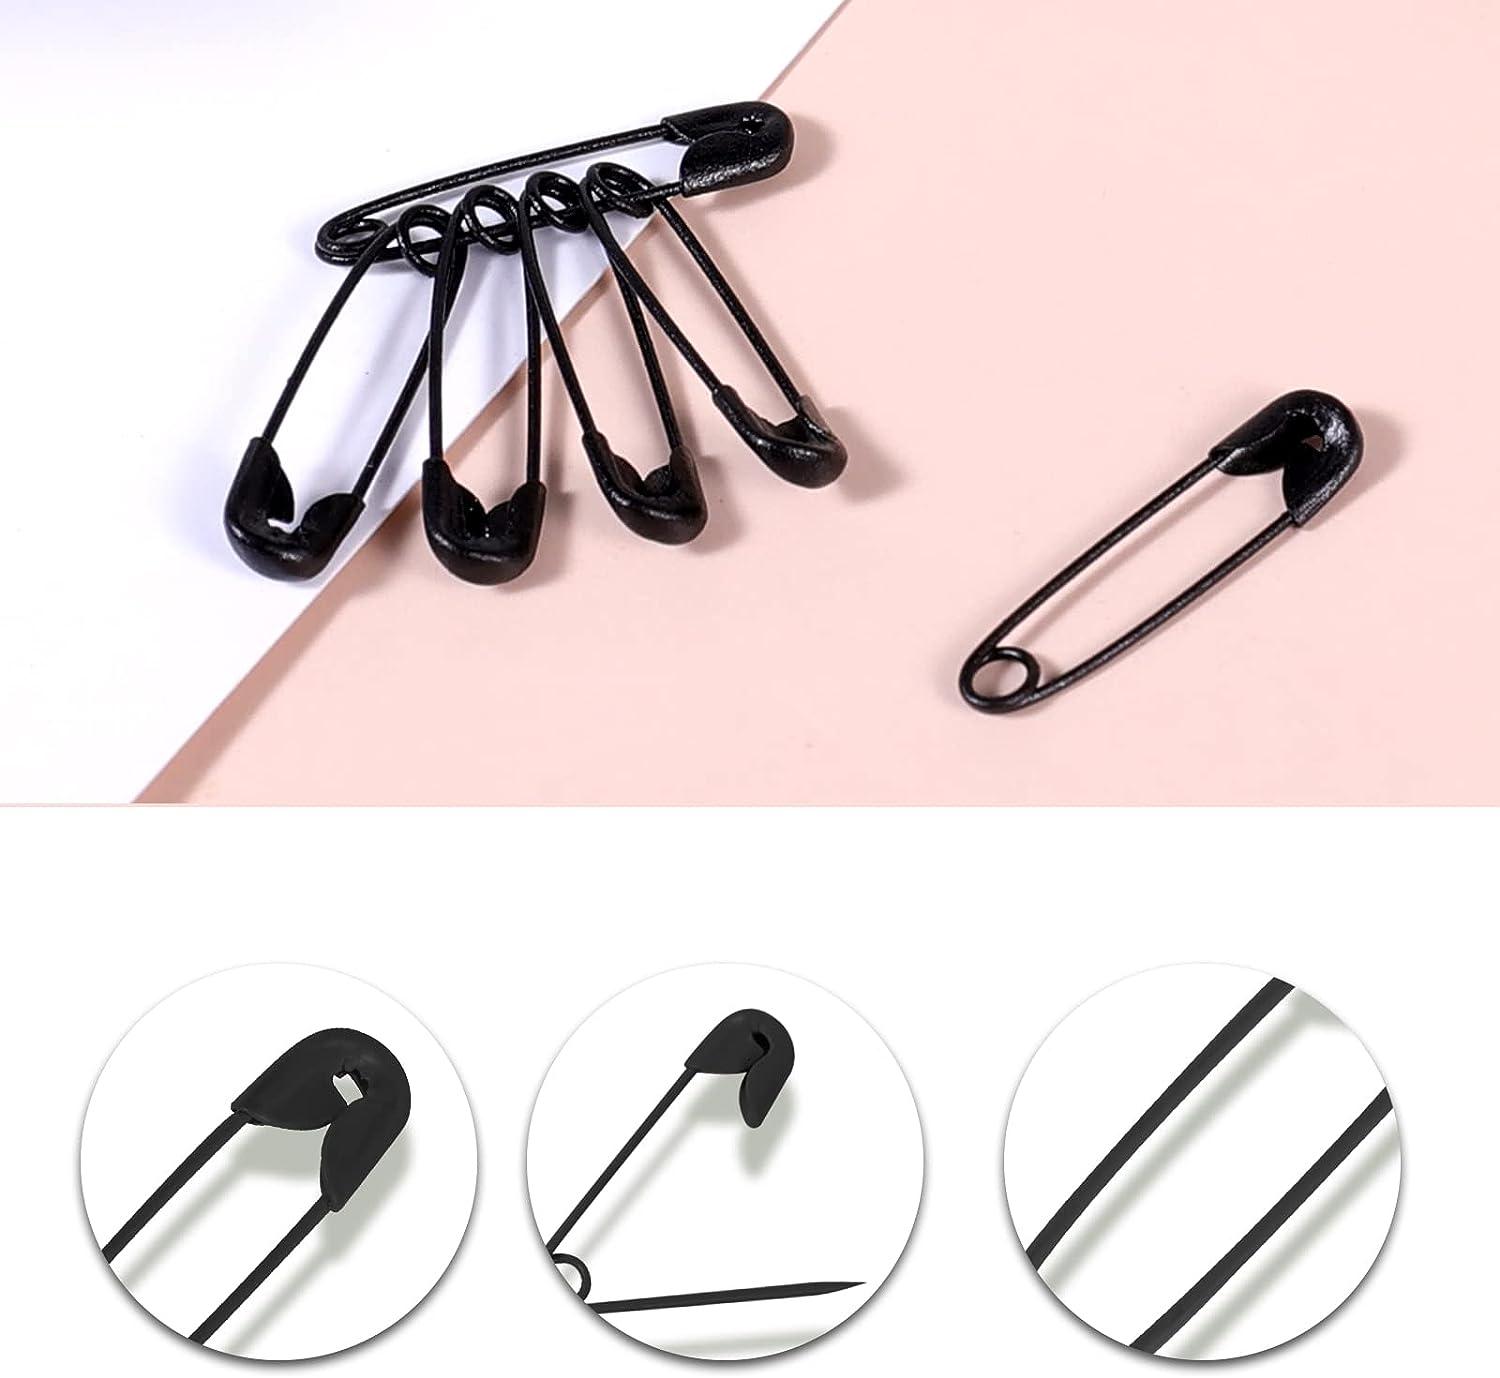 KINBOM 120 Pcs 19mm Safety Pins Mini Safety Pins Metal Safety Pins for Art  Craft Sewing Jewelry Making (Black)